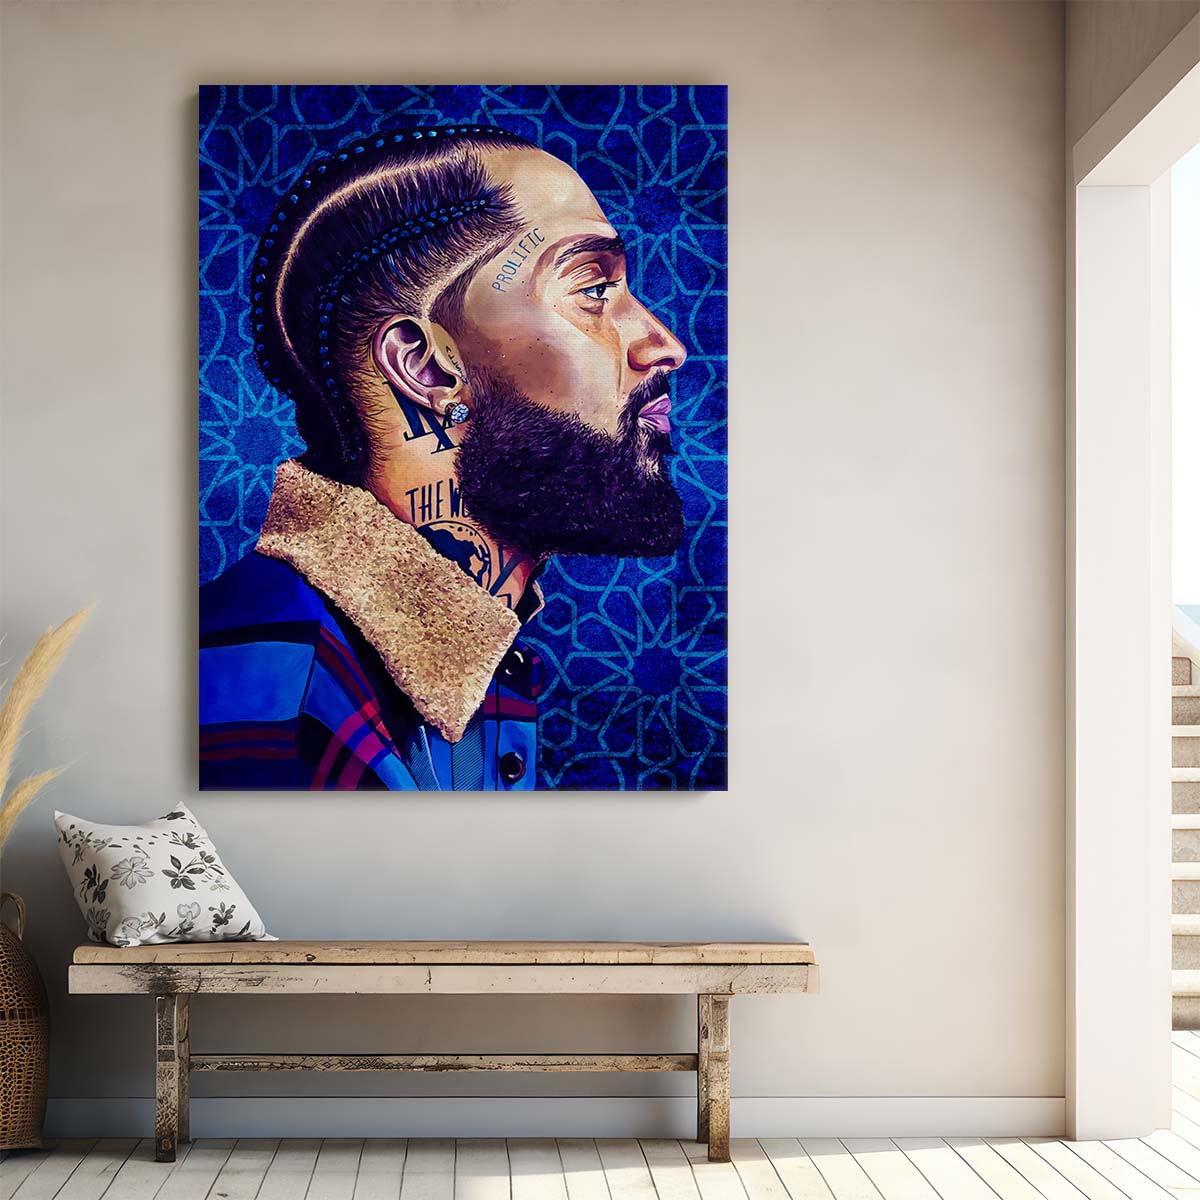 Nipsey Hussle The Marathon Continues Wall Art by Luxuriance Designs. Made in USA.